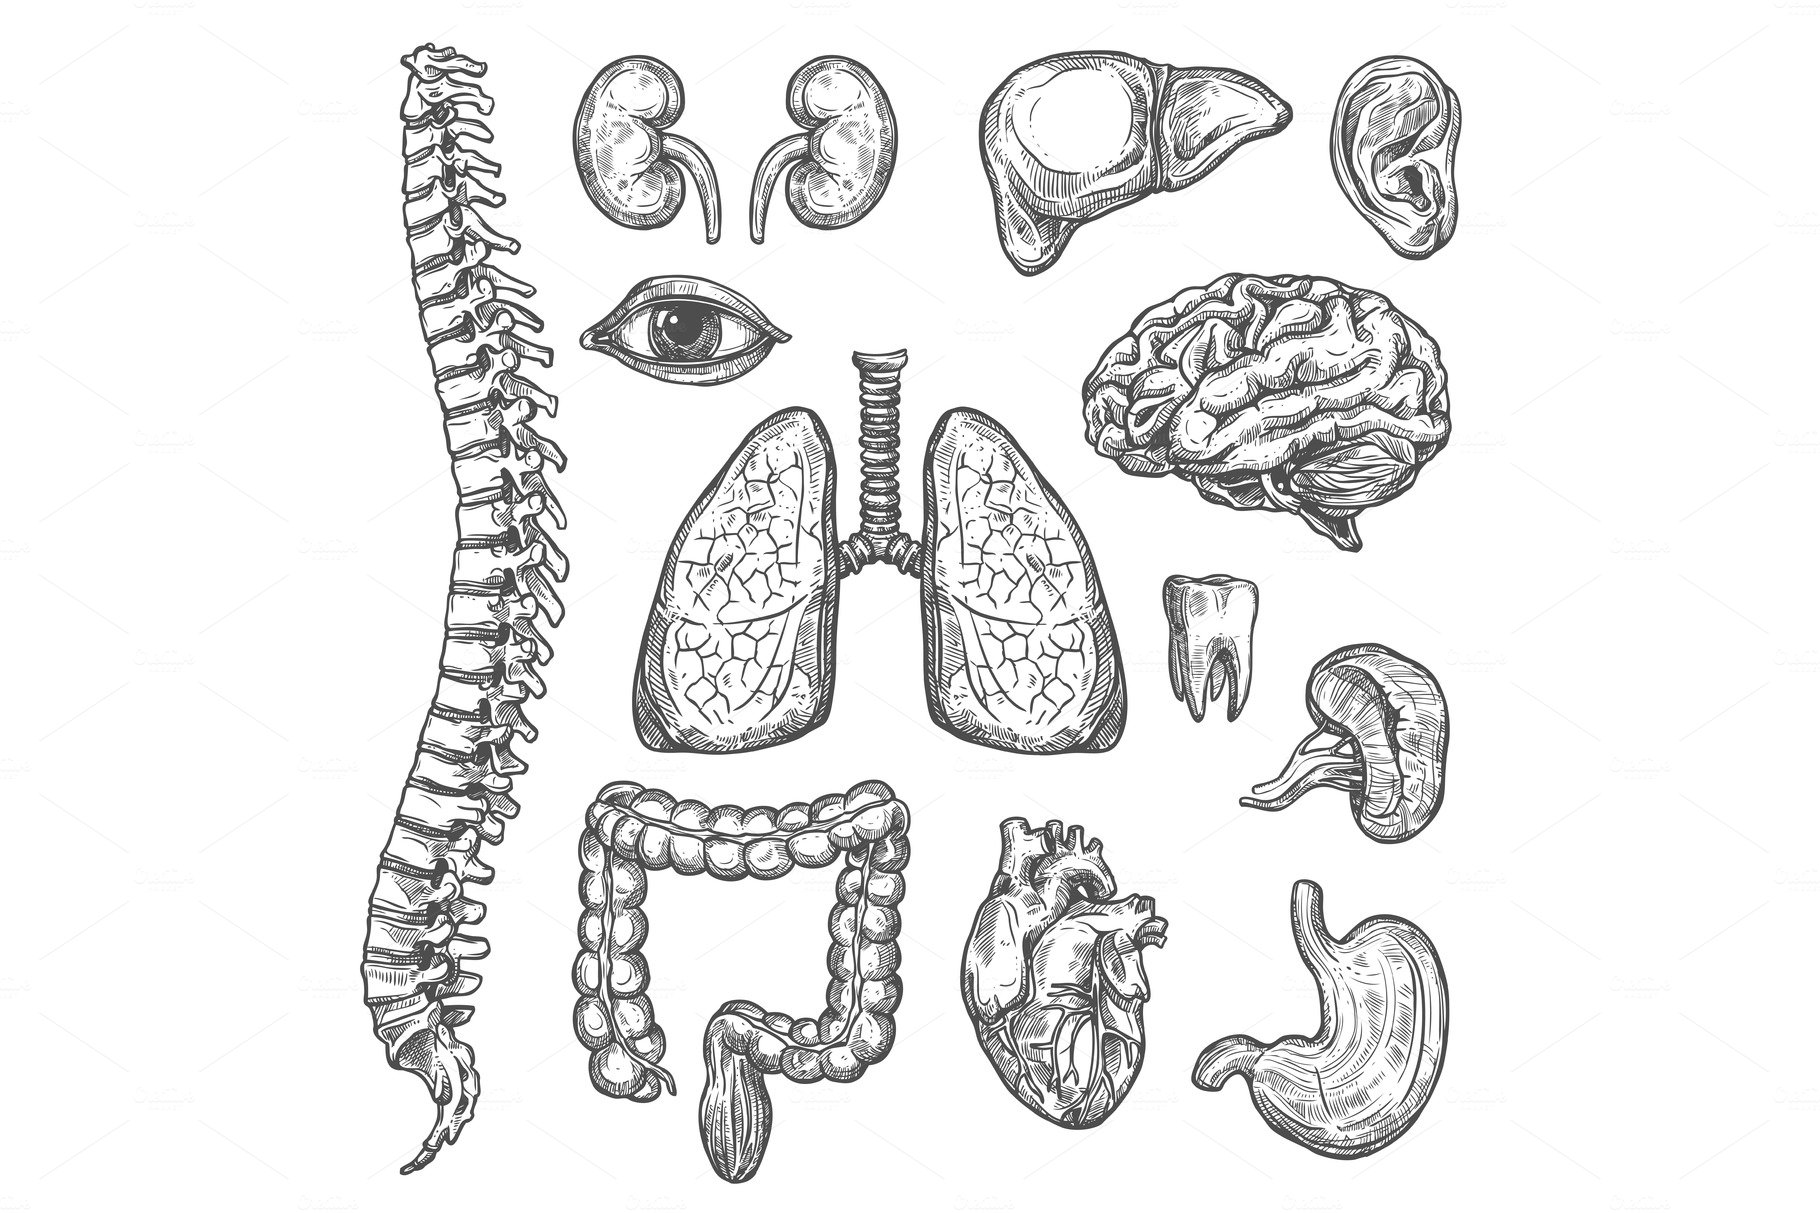 Human organs vector sketch body anatomy icons cover image.